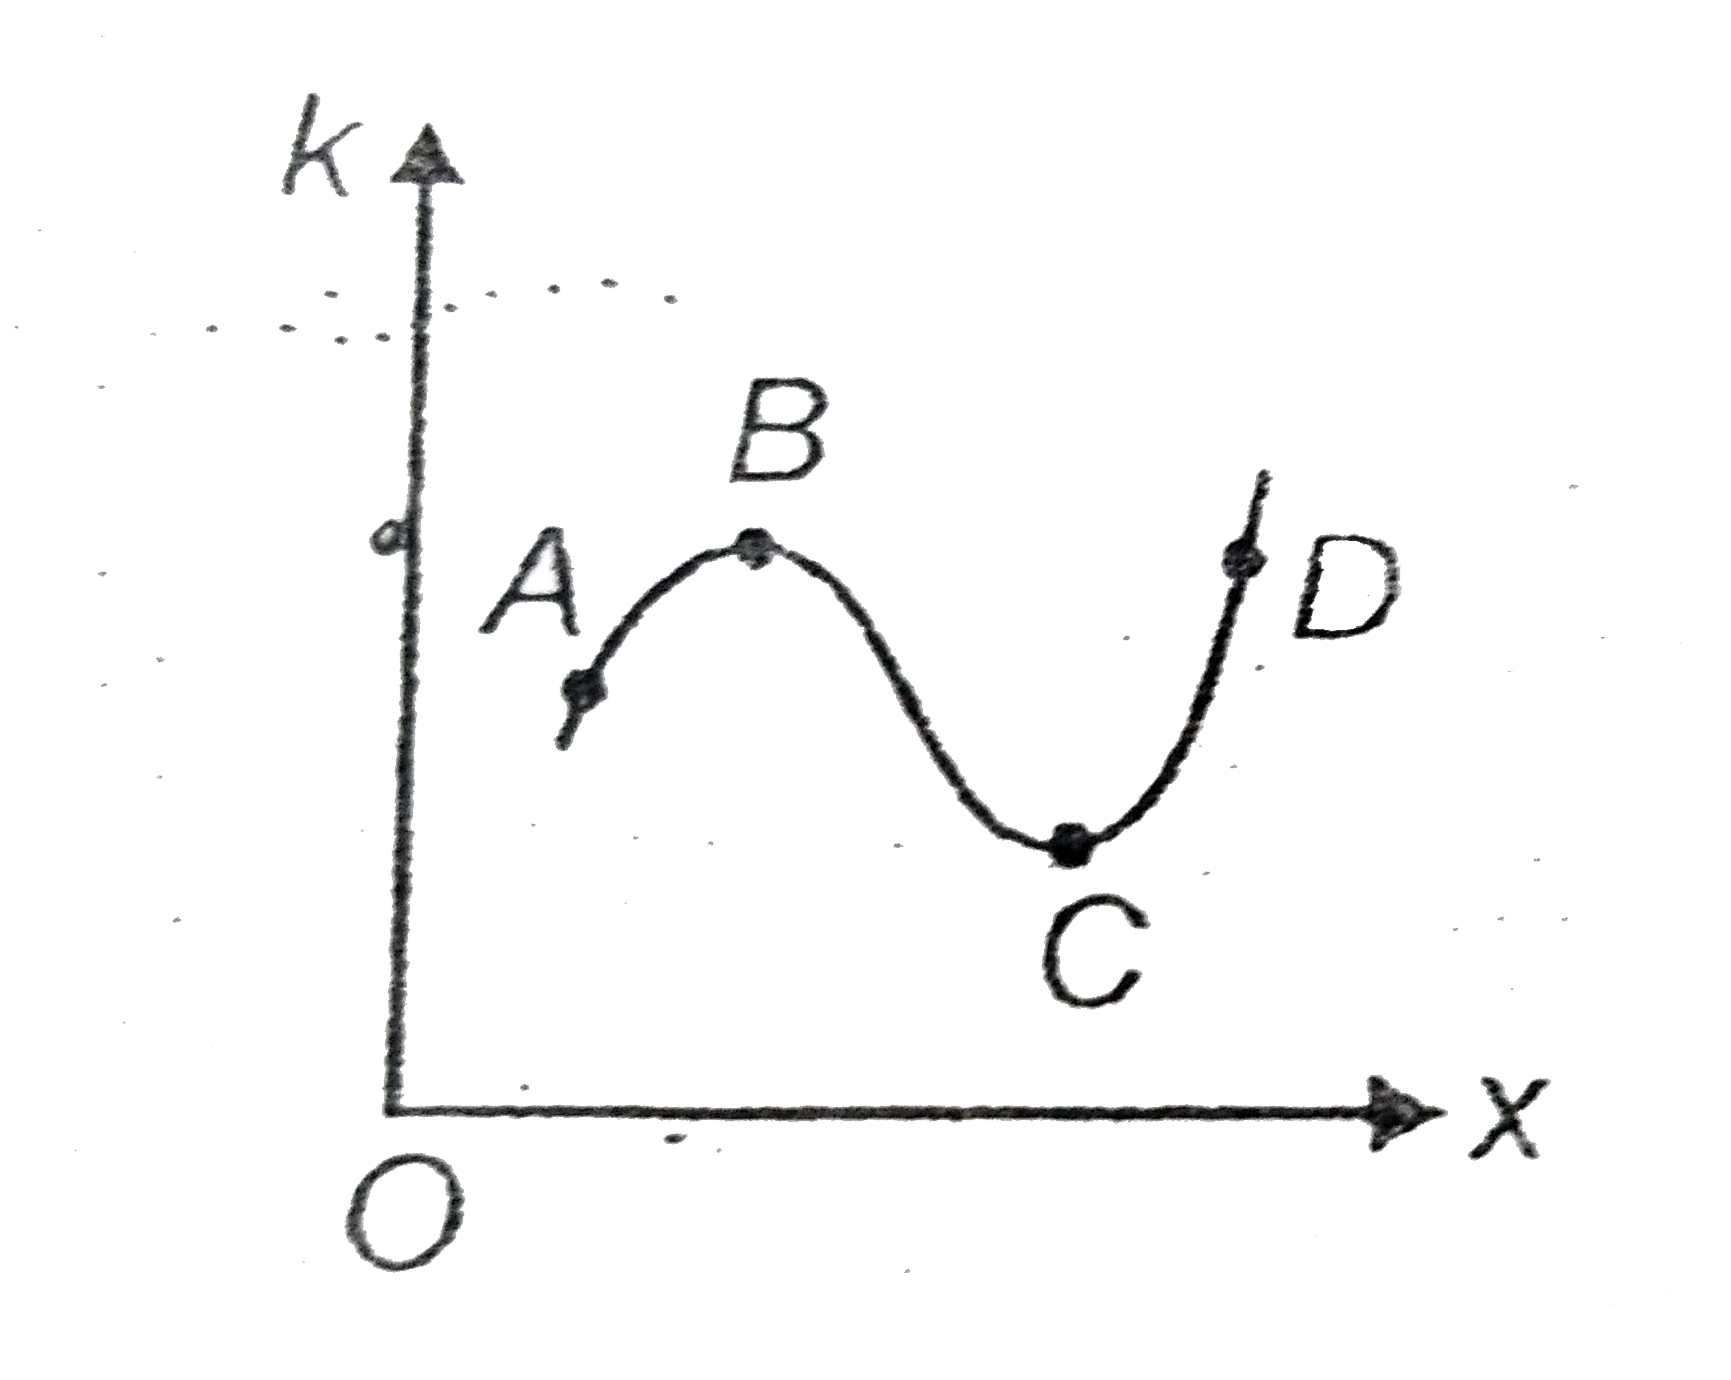 For a particle moving under the action of a variable force, kinetic energy (k) varsus position (x) graph is given, then